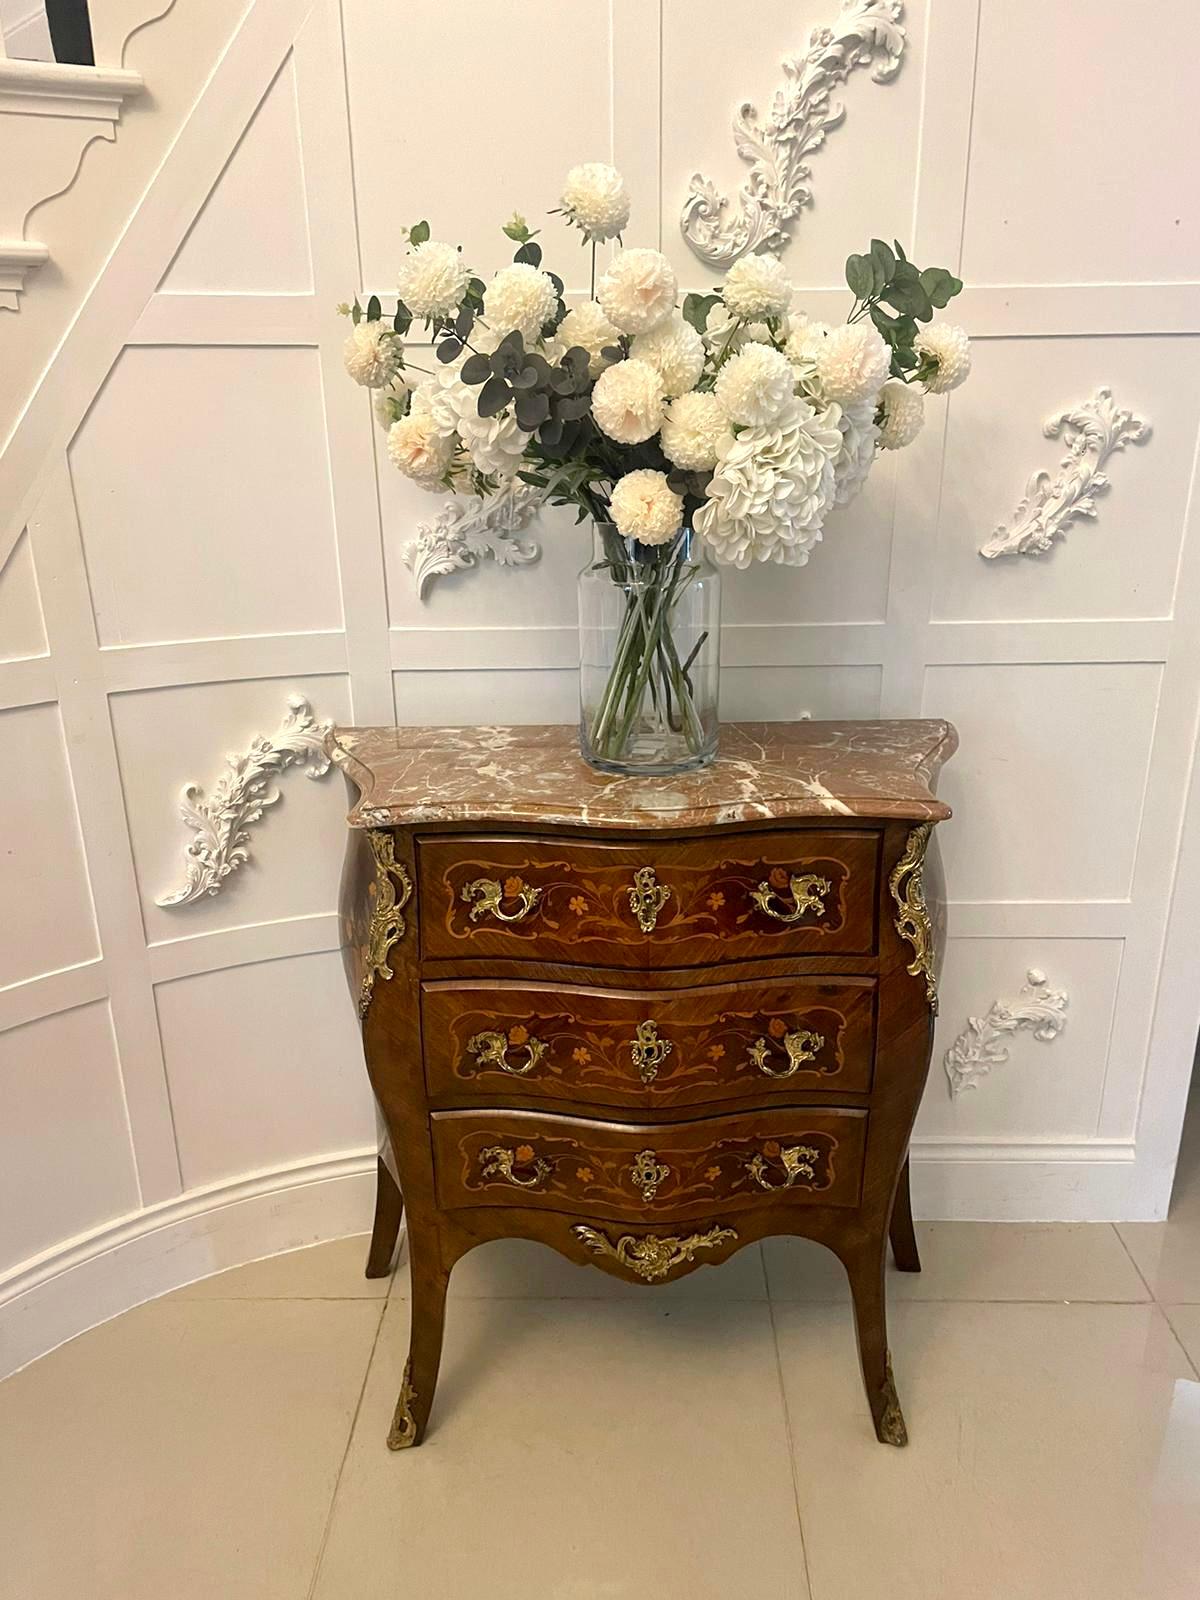 Antique Victorian French quality kingwood inlaid marquetry marble top commode/chest of drawers 
having a serpentine shaped marble top with a moulded edge above three serpentine shaped drawers with quality marquetry inlay, original ornate gilded